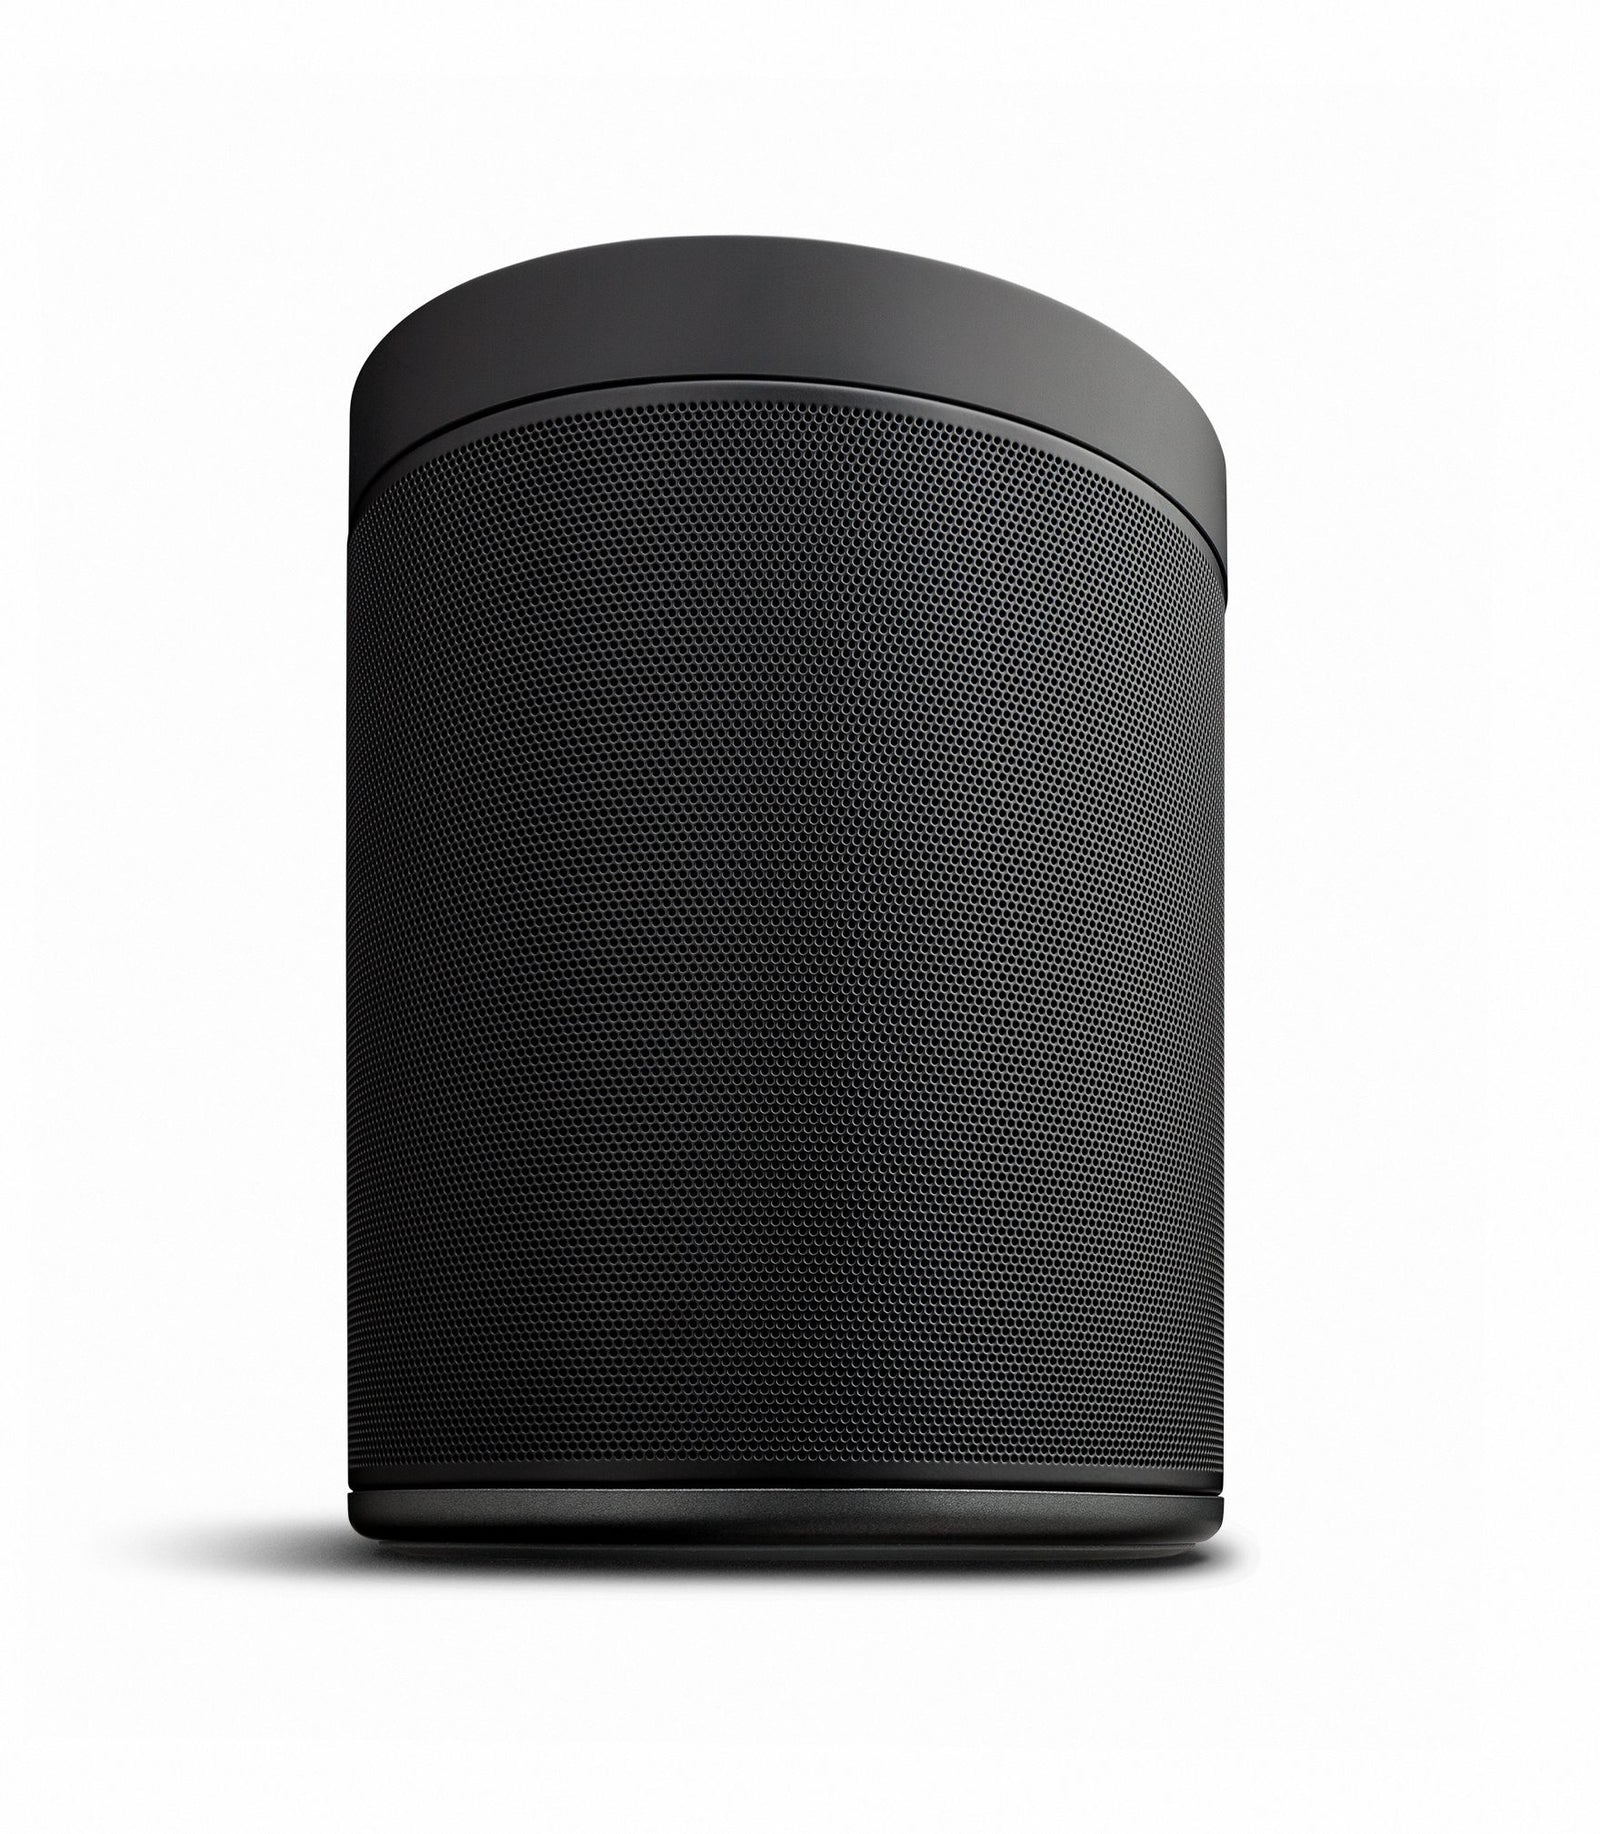 Yamaha MusicCast 20 (WX-021) - MusicCast Zone Products It’s how we connect. The MusicCast 20 delivers versatile listening with ease - able to be used as a standalone speaker, paired, or acting as surround speakers with a compatible MusicCast AV receiver or sound bar